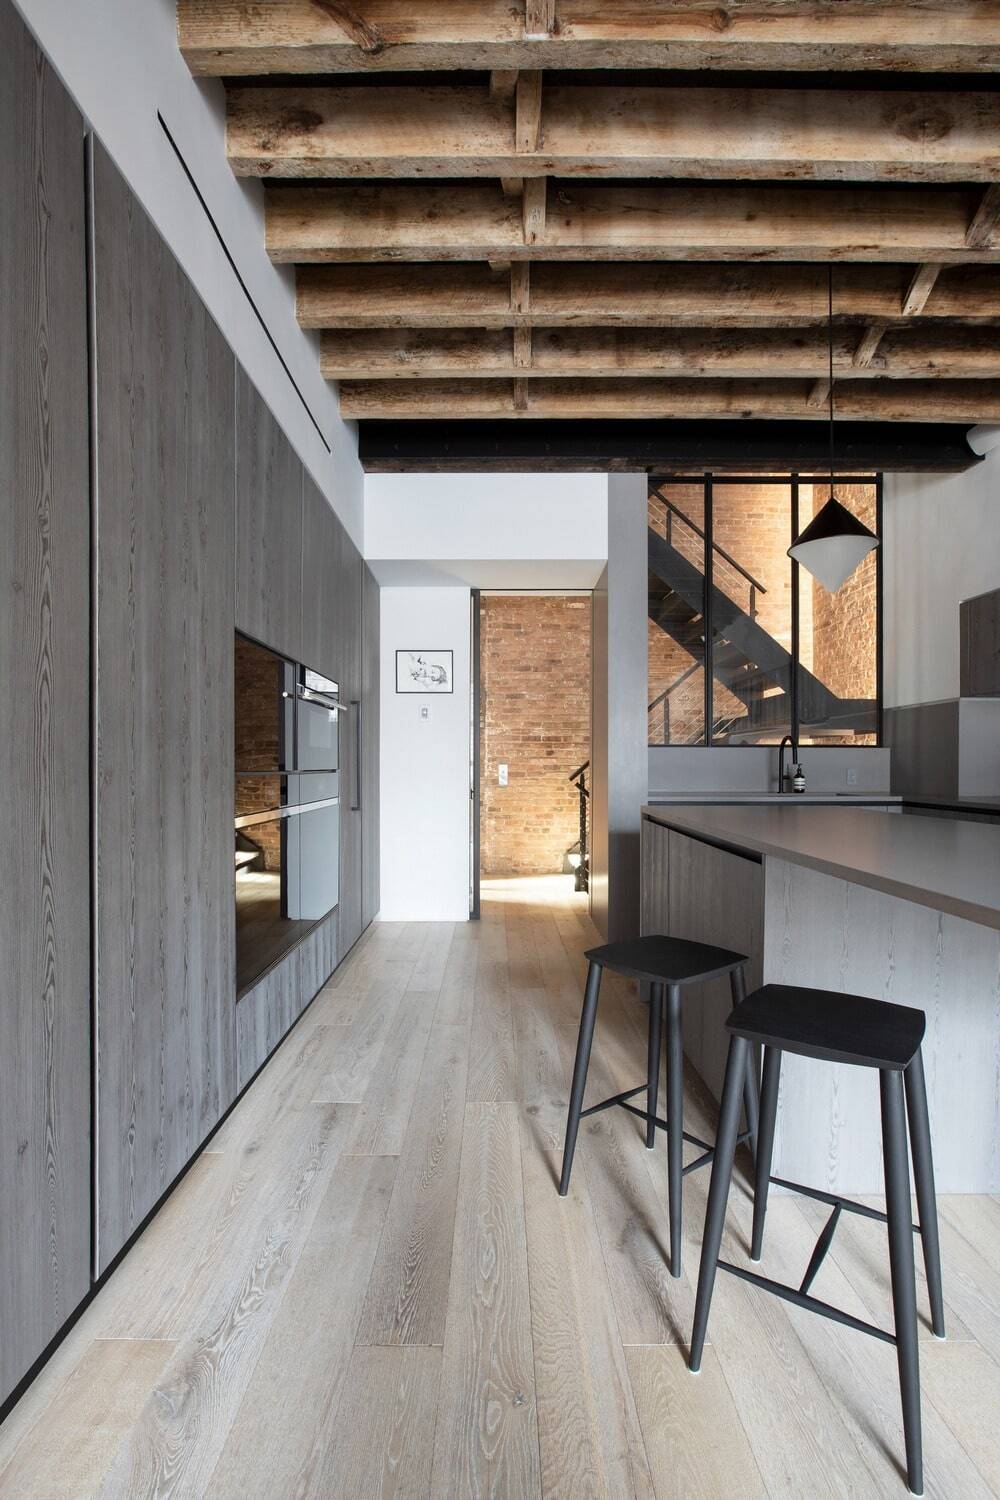 Archi-Tectonics Converted an Industrial Structure in SoHo into an 8-Story Family Home